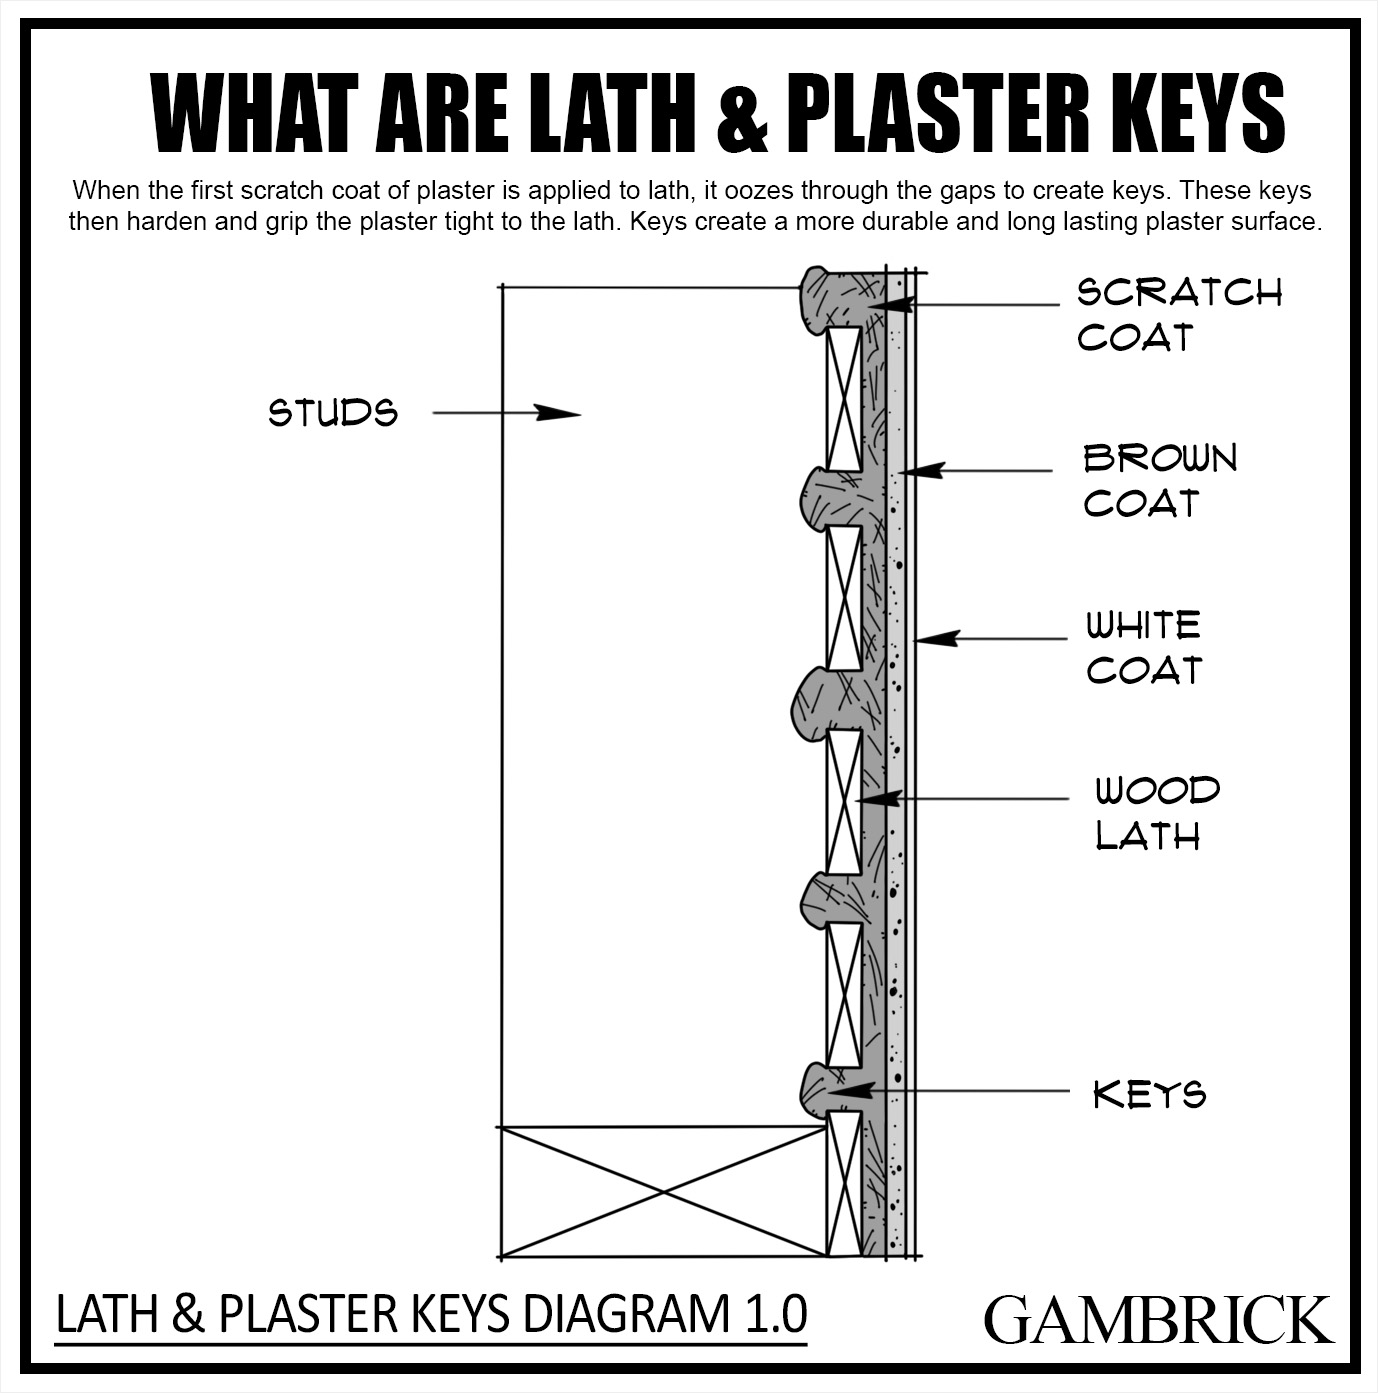 what is plaster and lath diagram 2.0